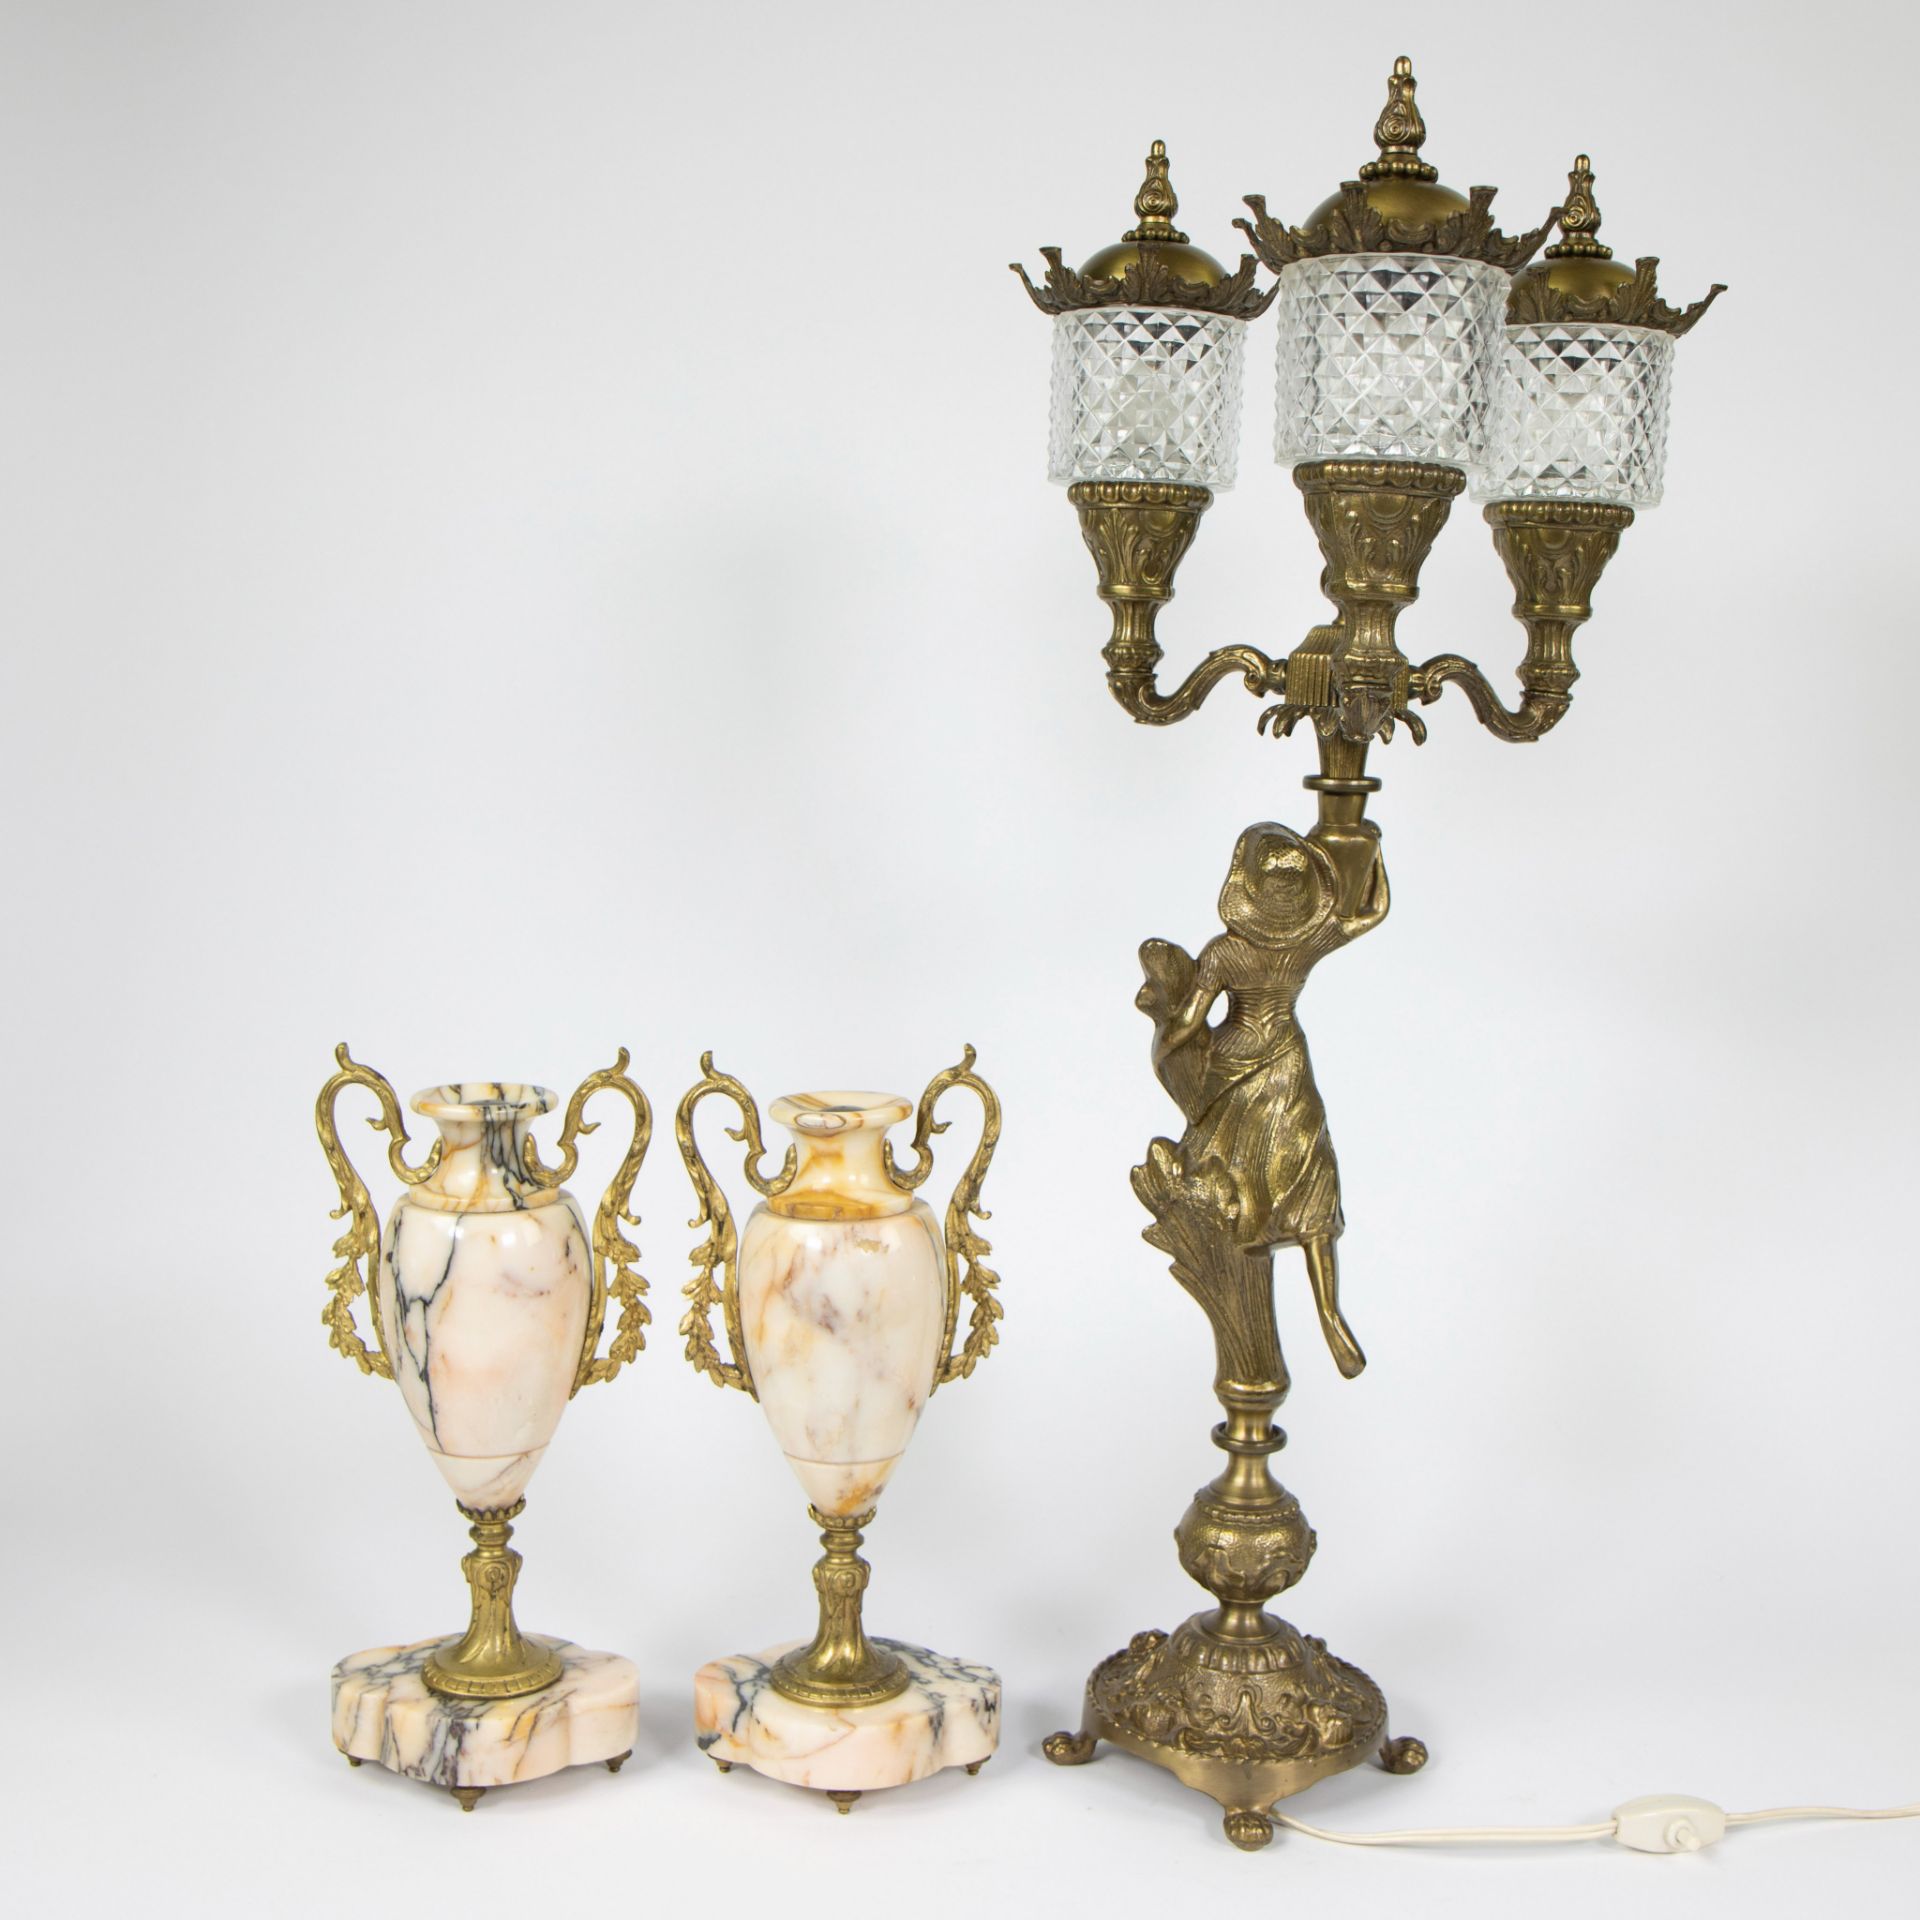 Large decorative lampadaire with 3 light points and 2 marble cassolettes. - Image 4 of 4